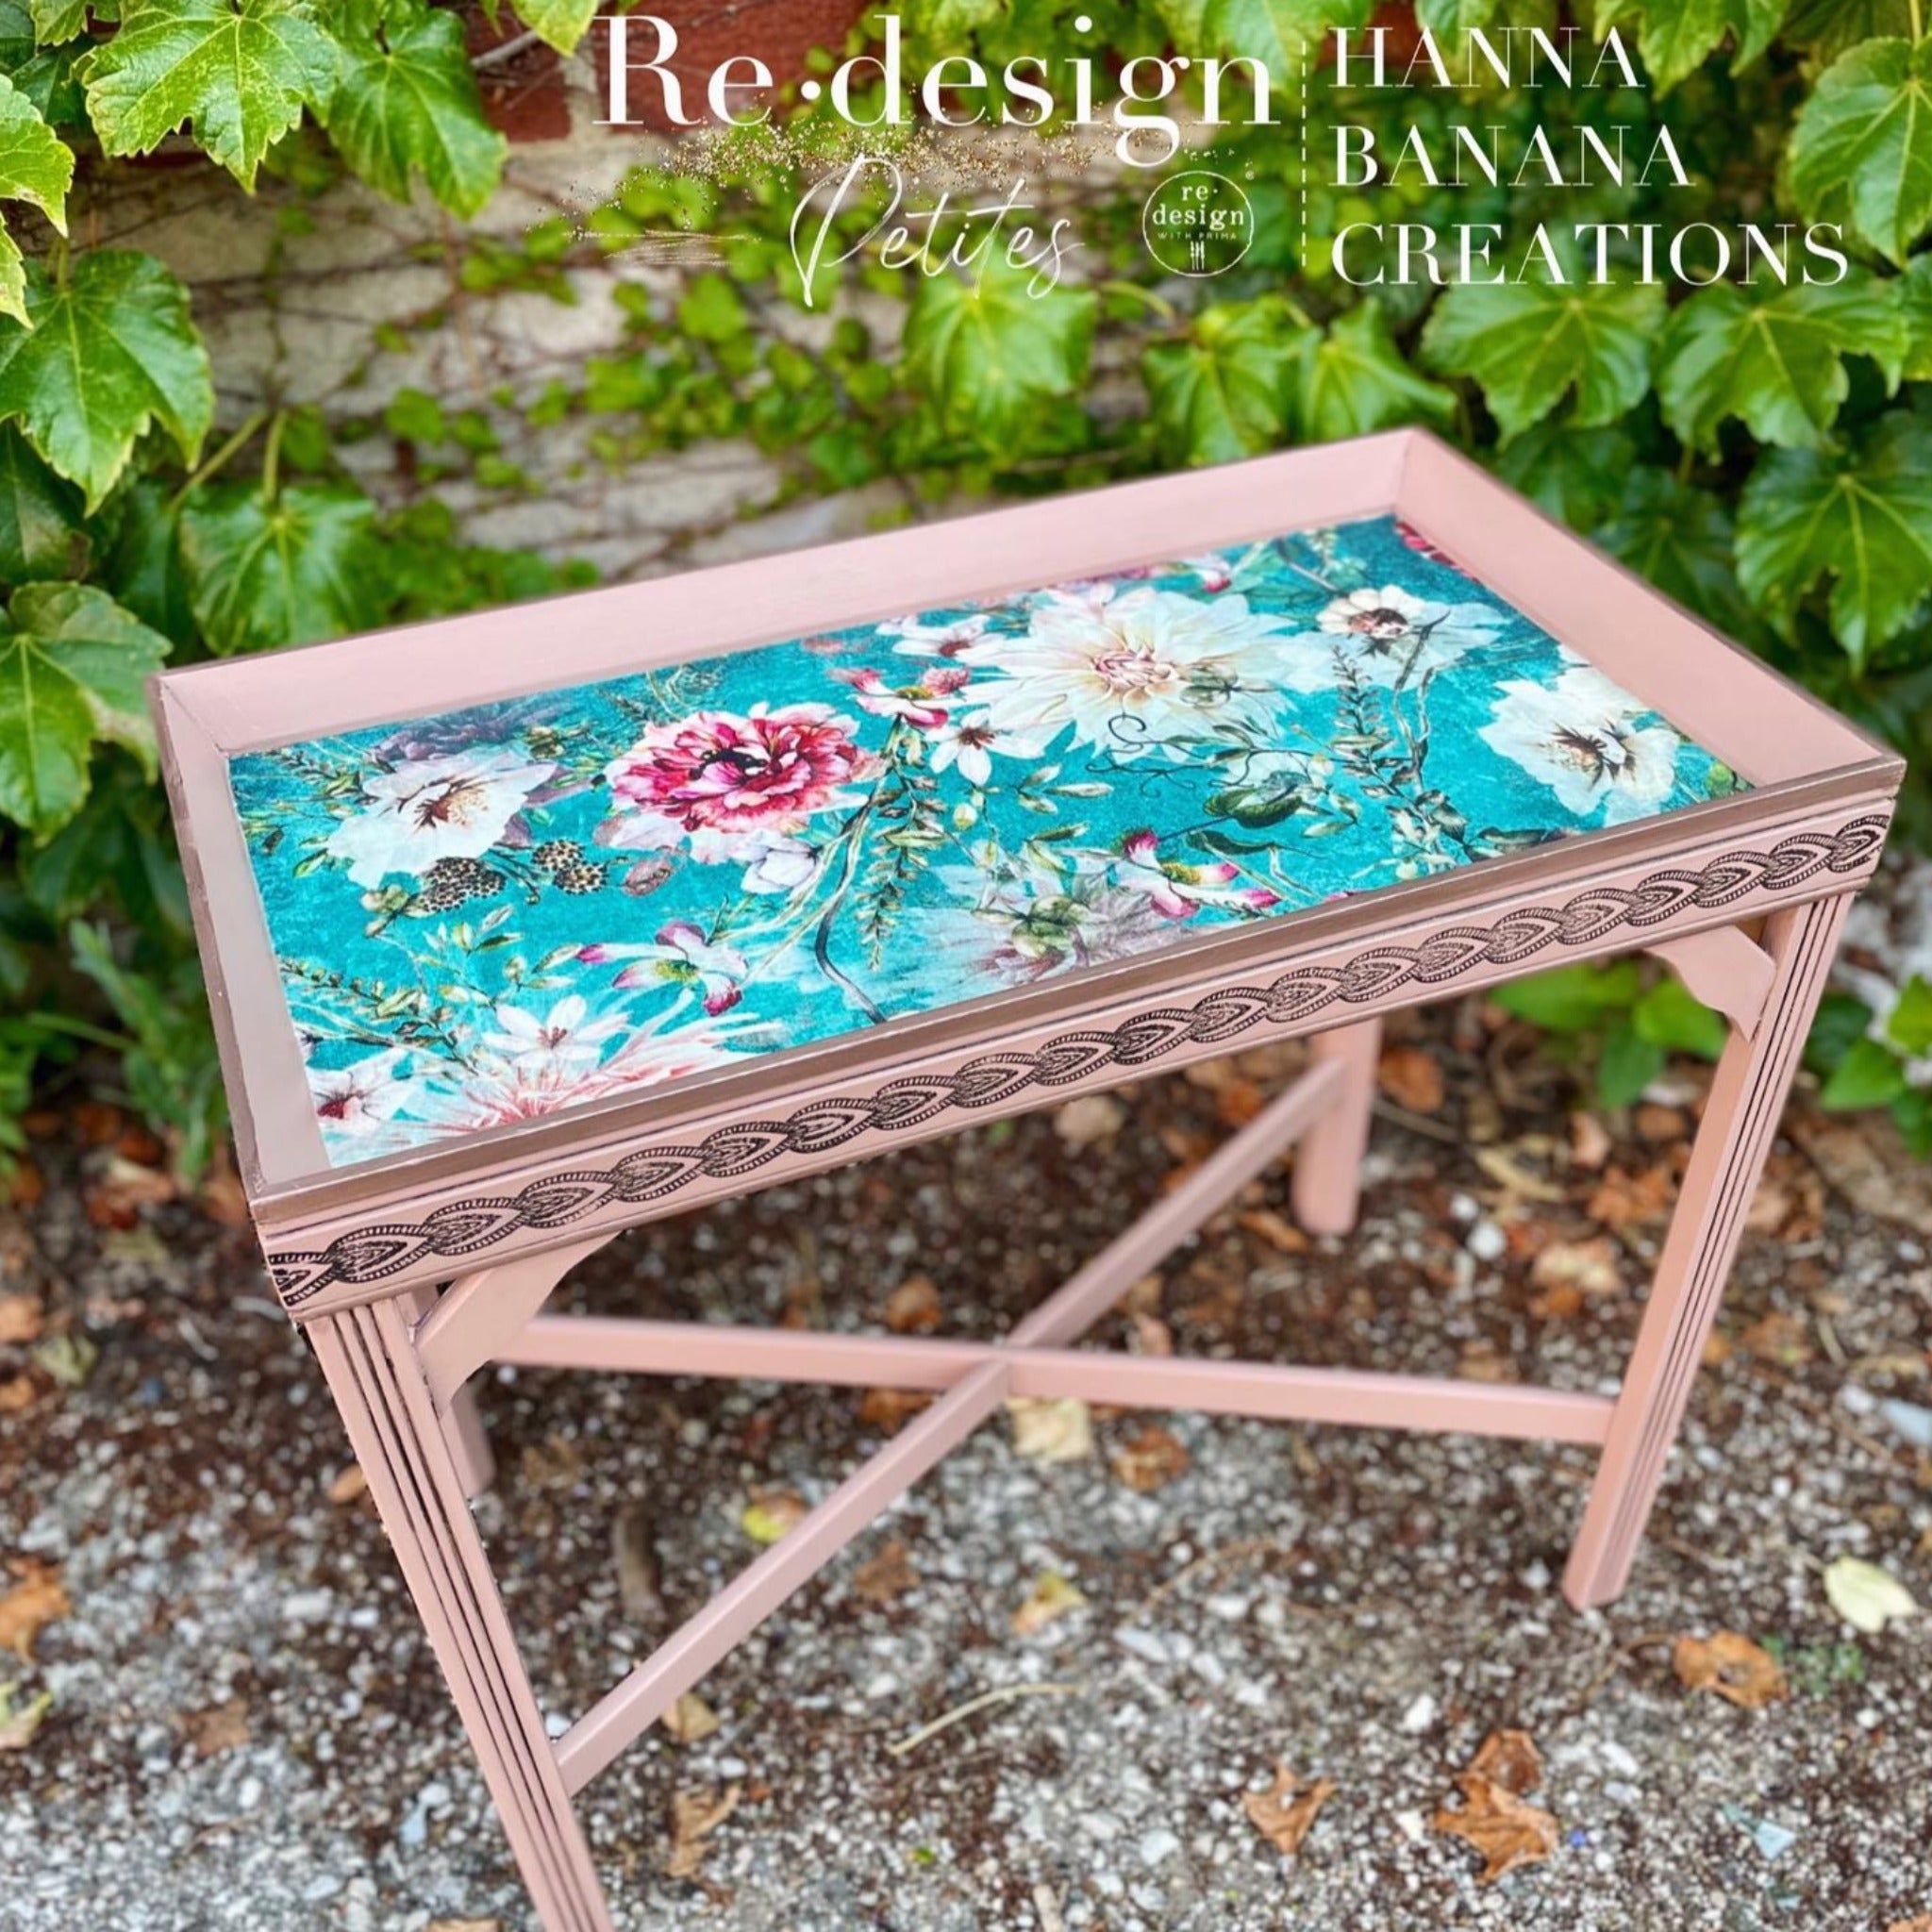 A vintage tray table refurbished by Hanna Banana Creations is painted mauve and features ReDesign with Prima's Discovering Dahlias tissue paper on the table inlay.